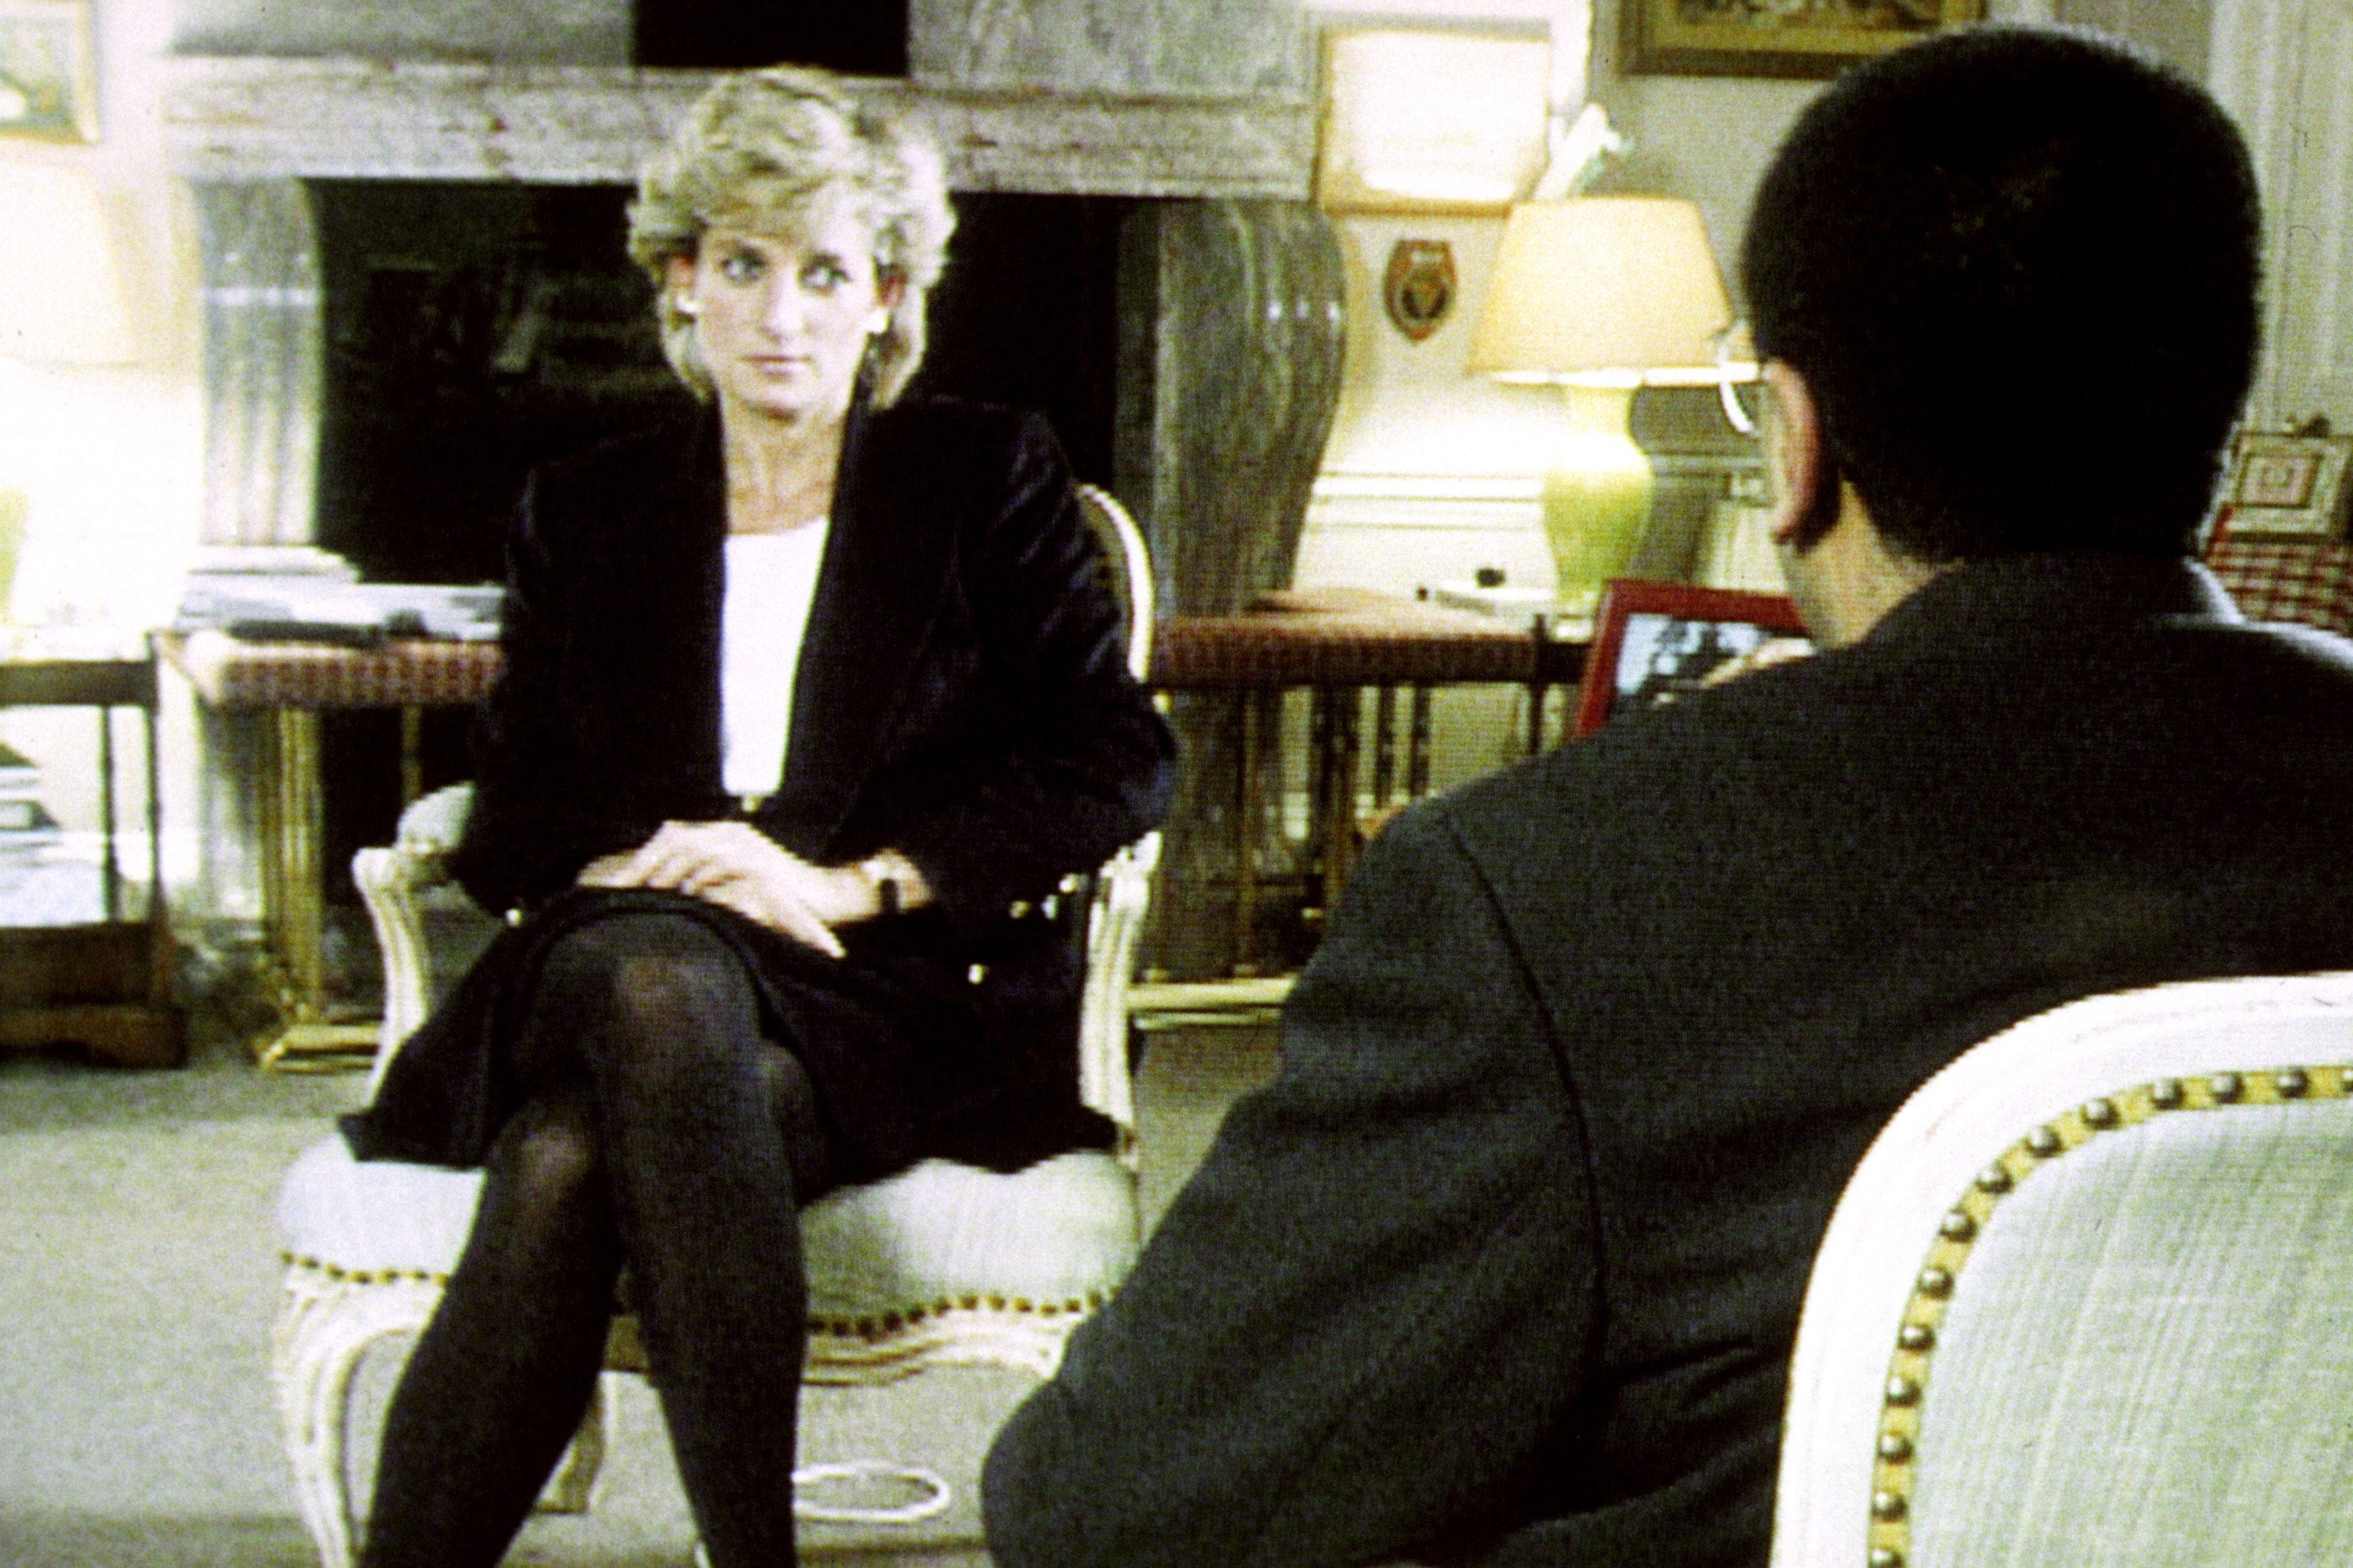 Diana, Princess of Wales, during her interview with Martin Bashir for the BBC (BBC)